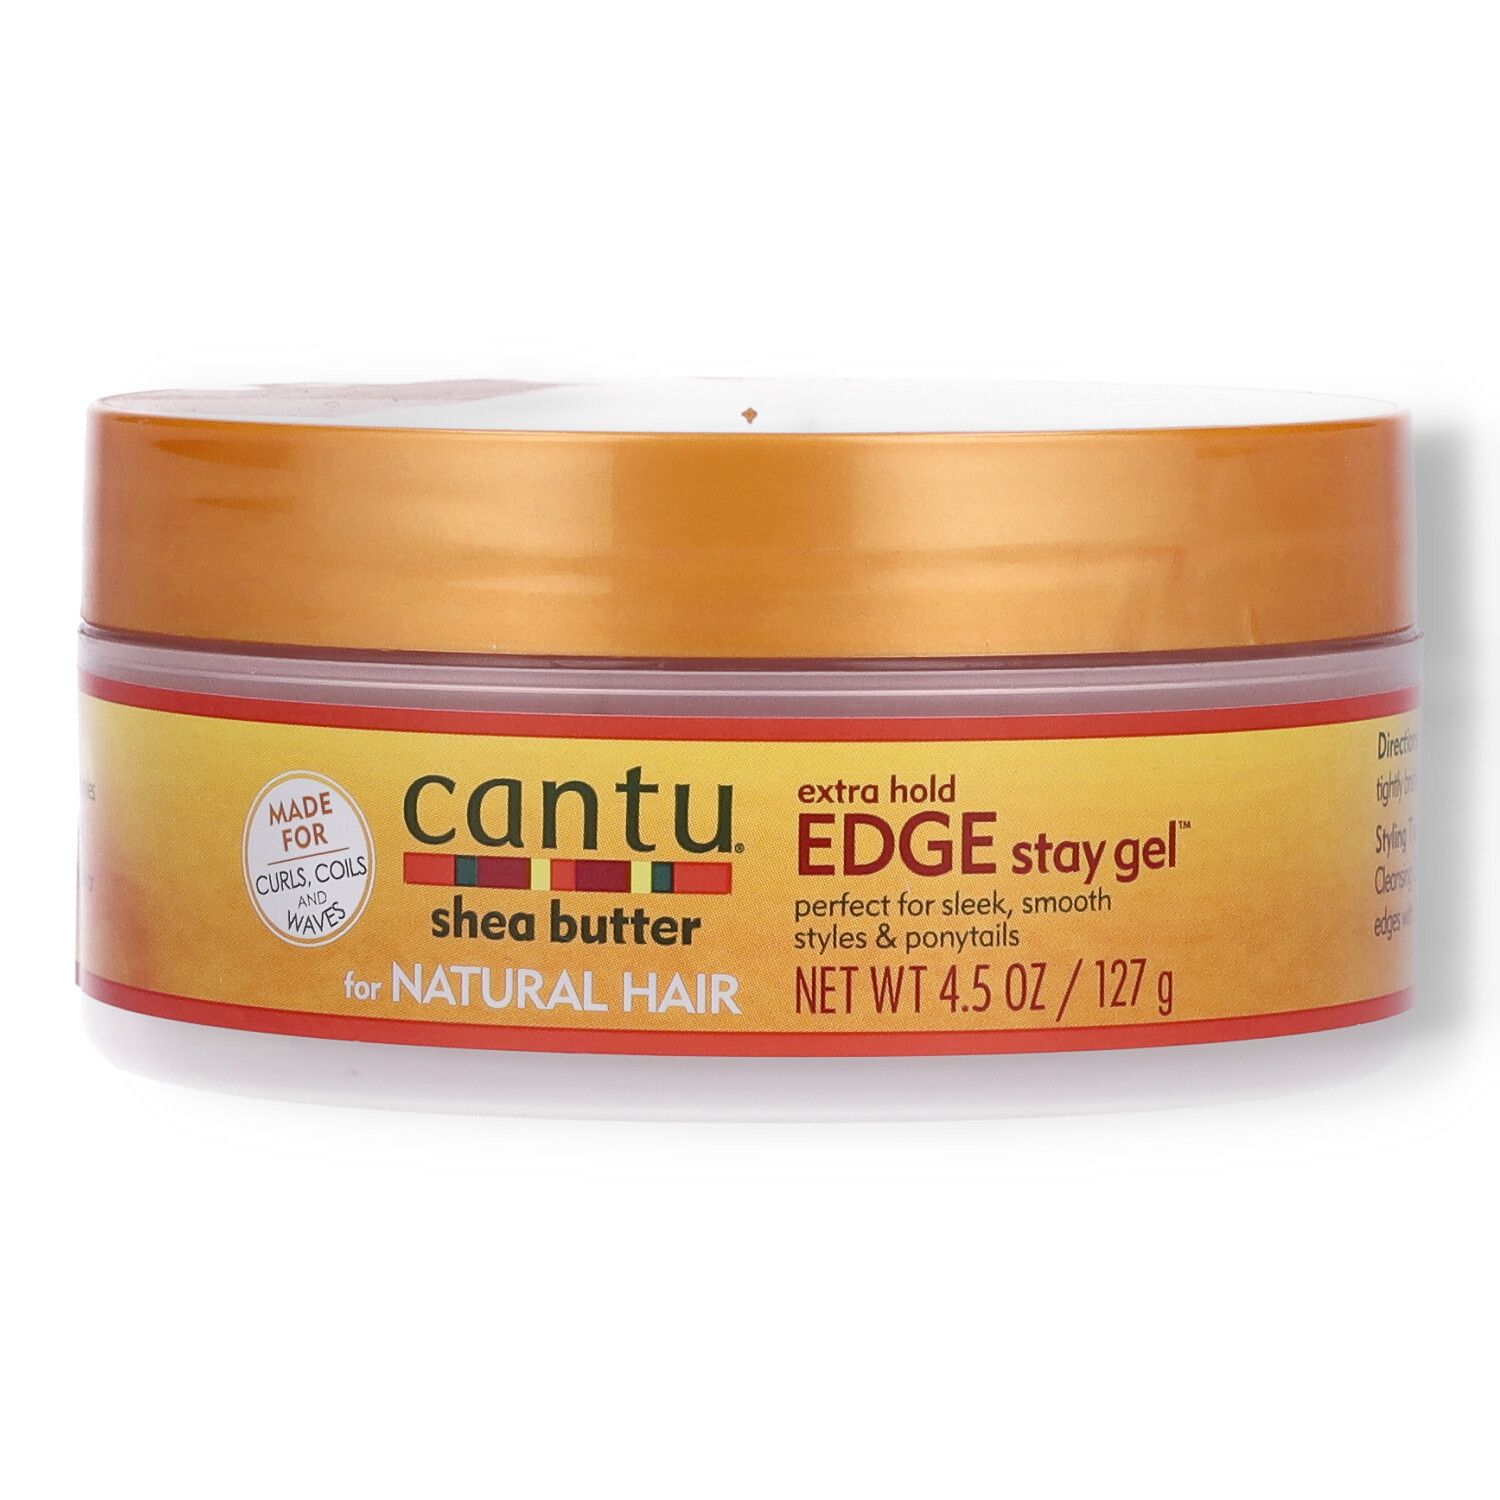 Cantu Shea Butter Extra Hold Edge Stay Gel - 4.5oz